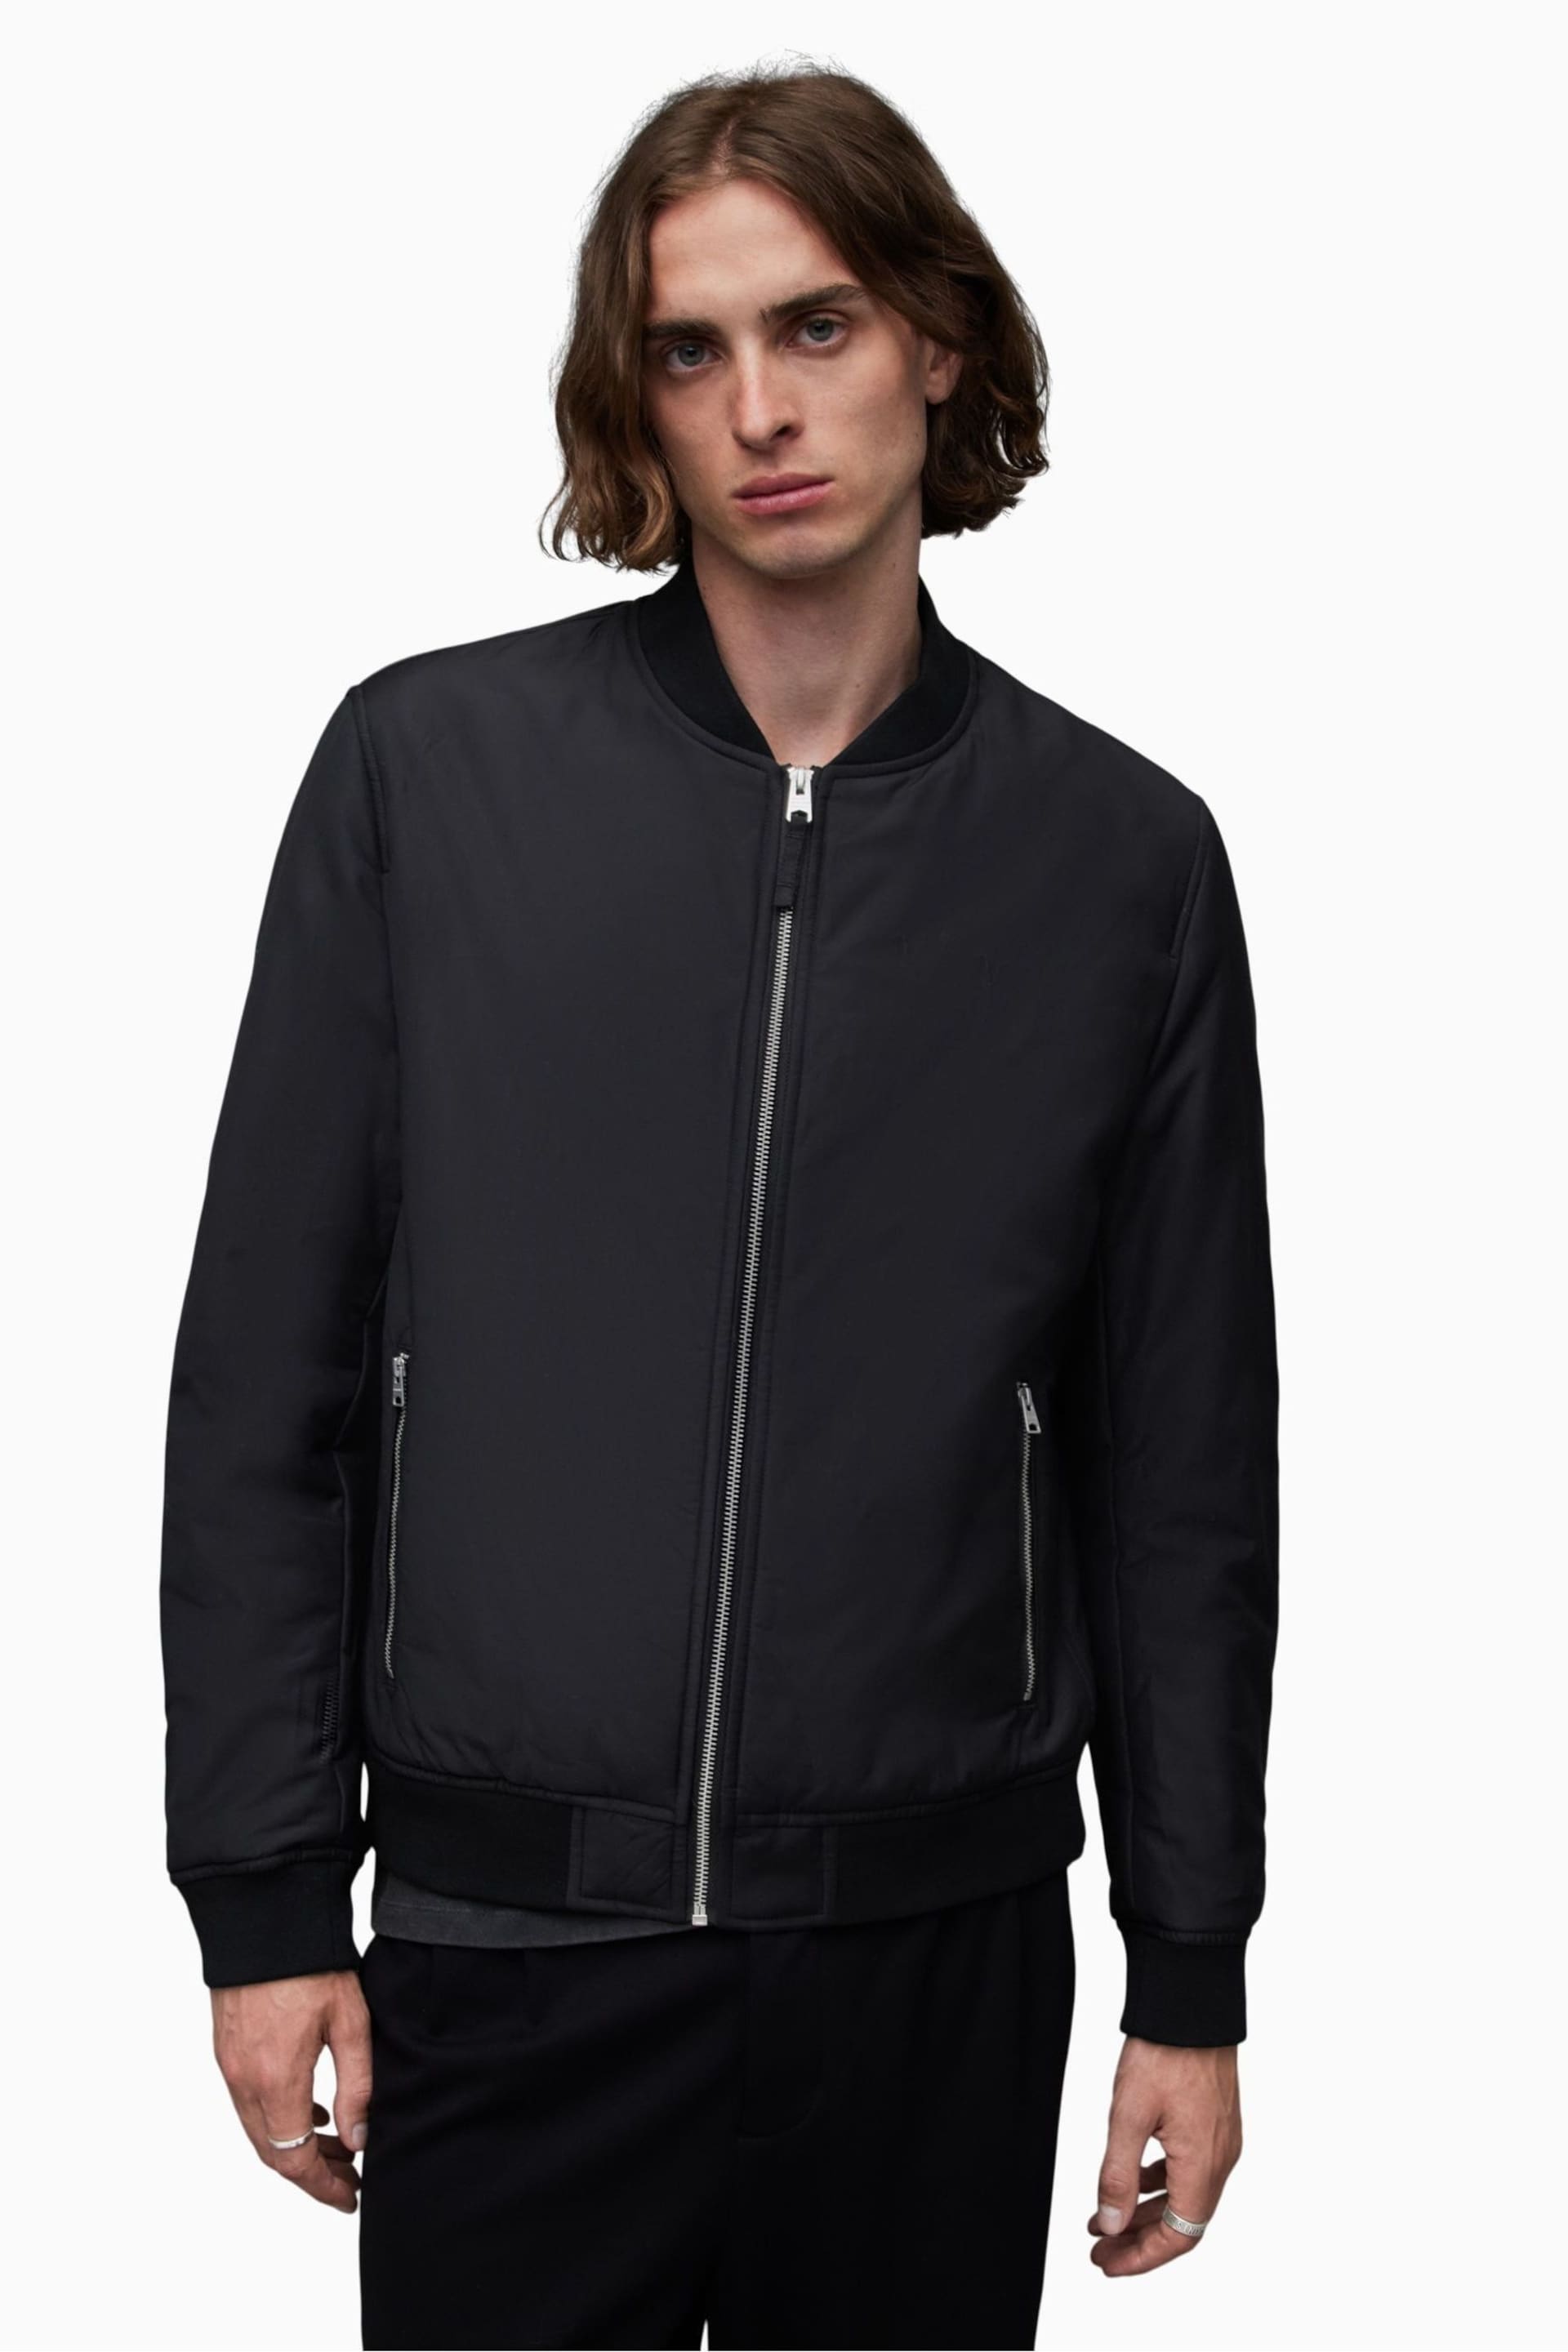 AllSaints Black Withrow Bomber Jacket - Image 1 of 7